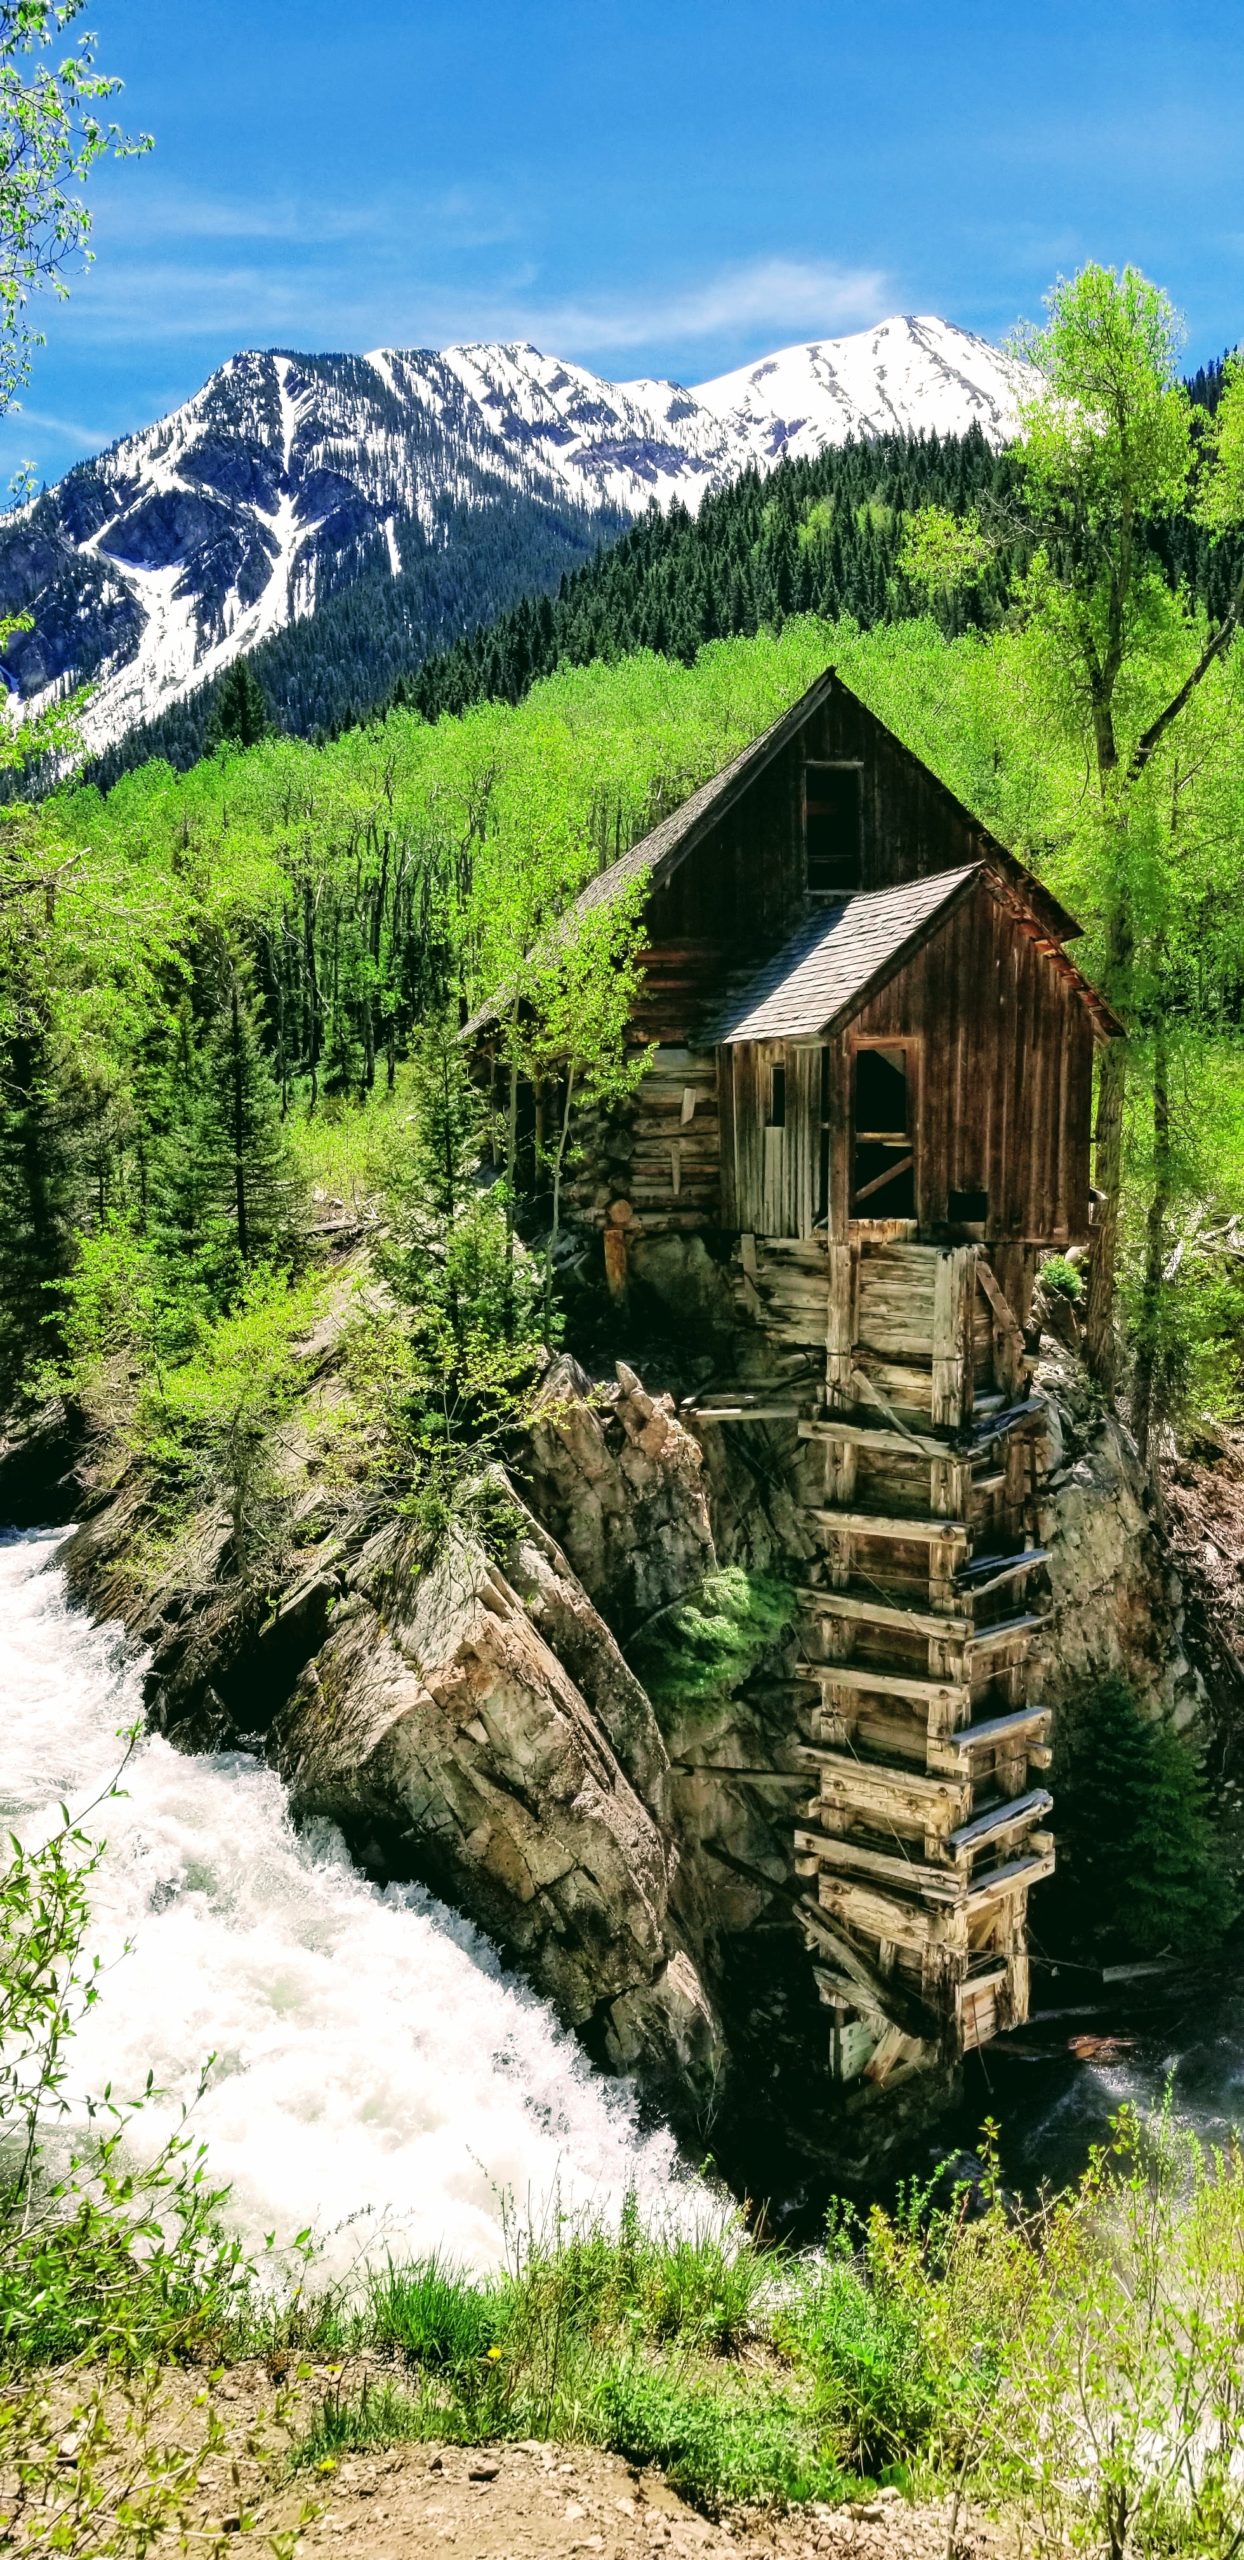 An old, dilapidated wooden mill teetering on a cliff with whitewater rushing below it, surrounded by yellow and green aspens